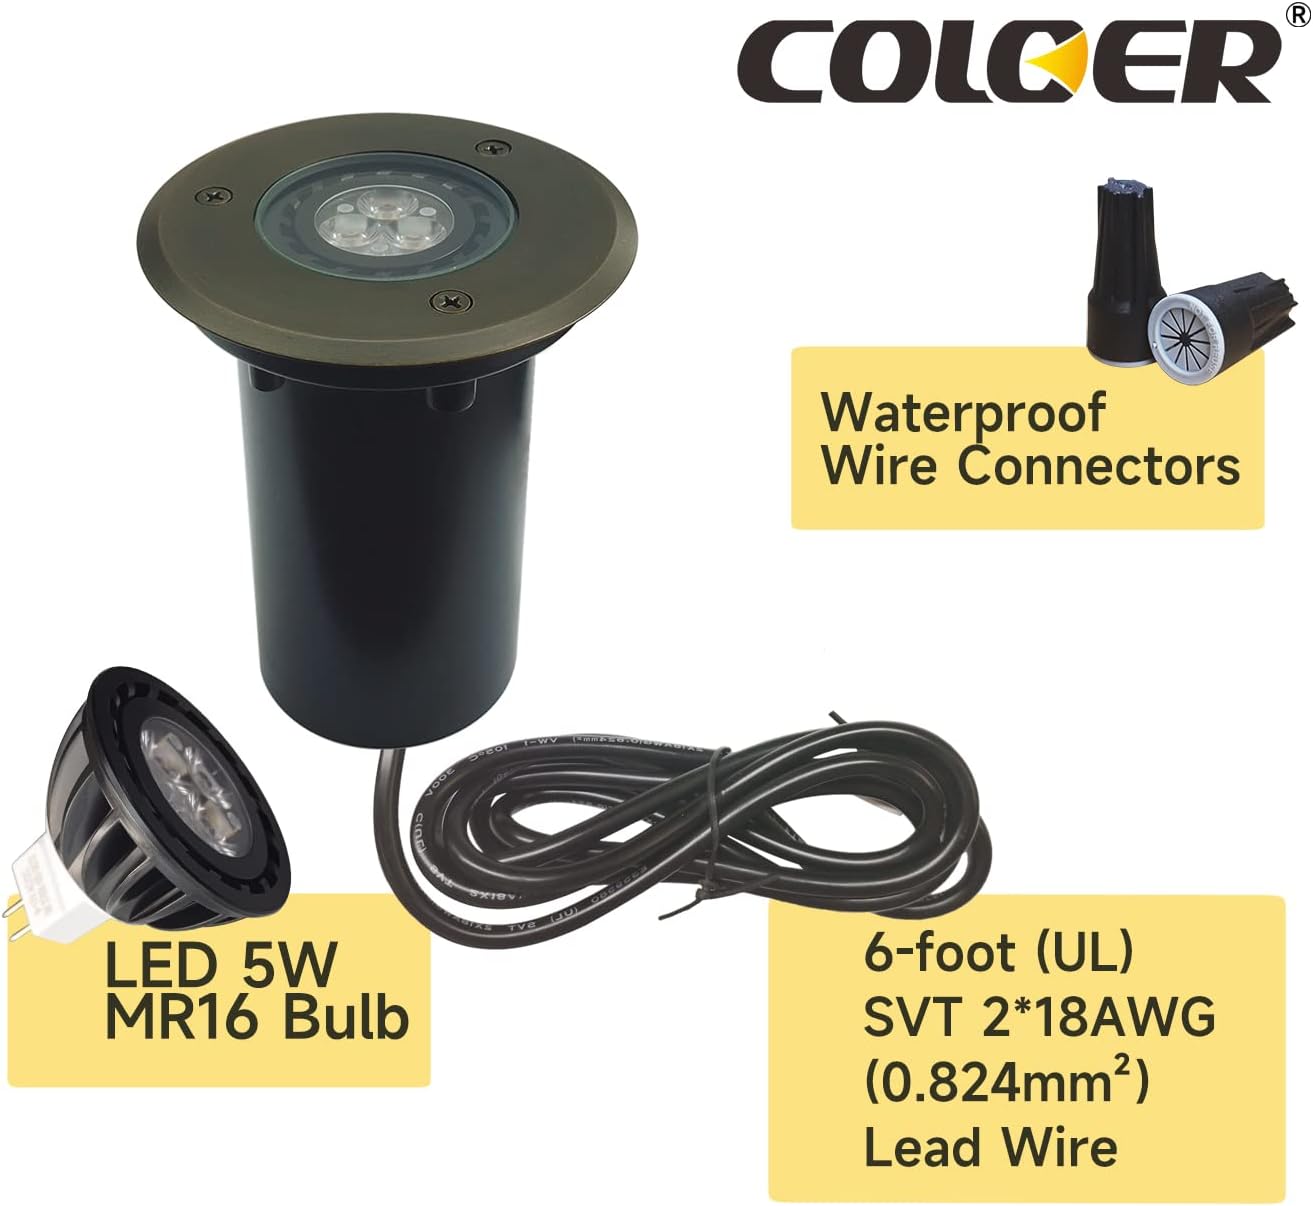 LED outdoor low voltage pathway light with waterproof wire connectors and 6-foot lead wire from COCER brand.